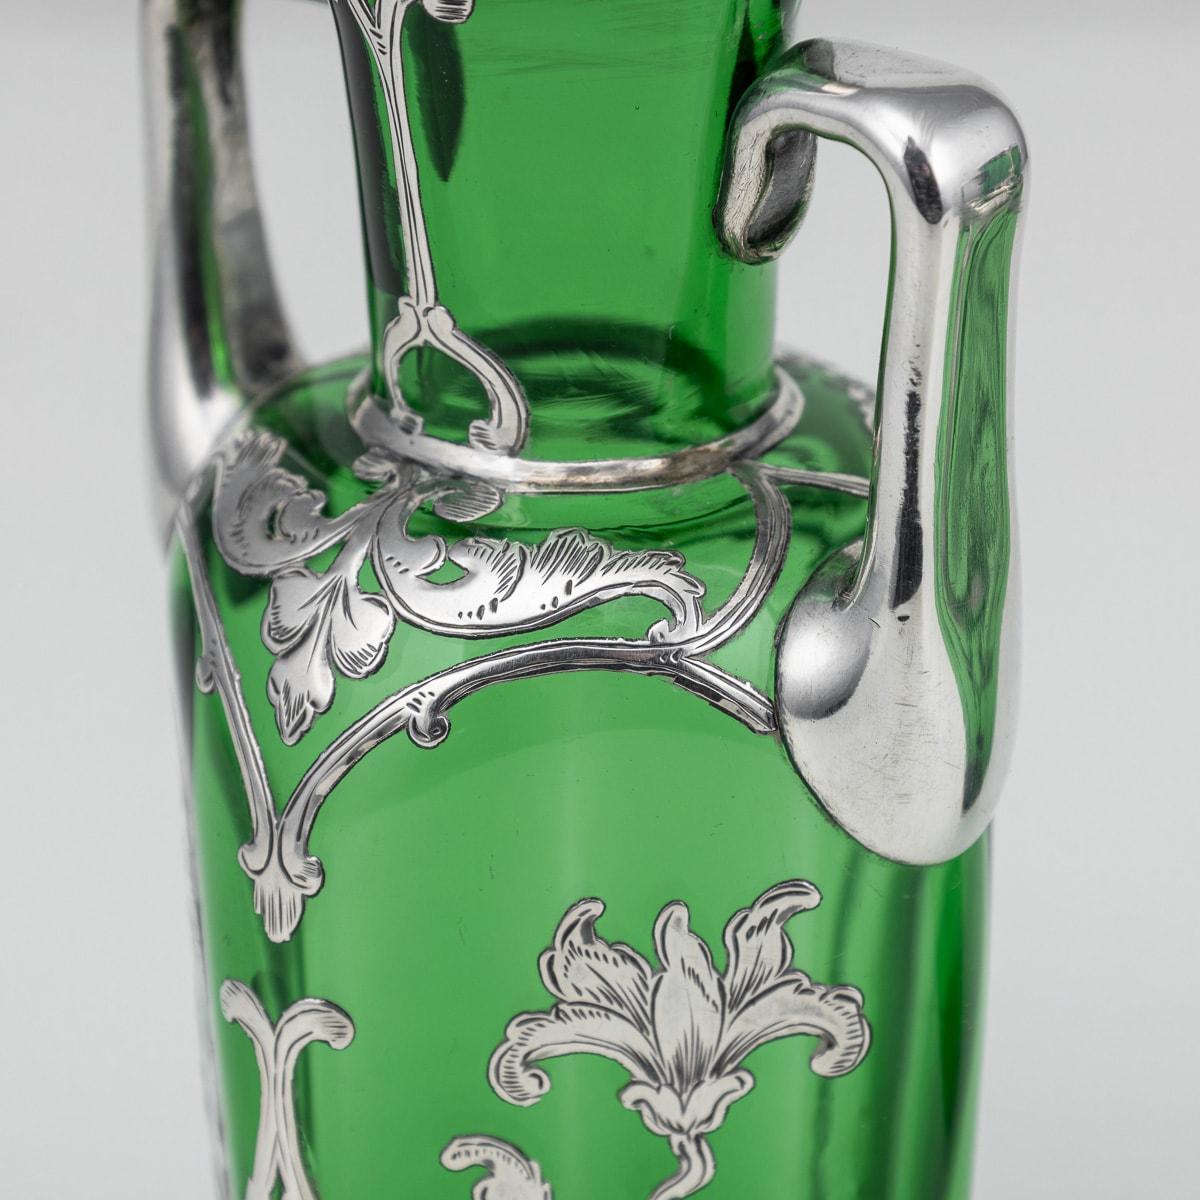 20th Century American Pair Of Green Glass Vases With Silver Overlay c.1920 For Sale 6